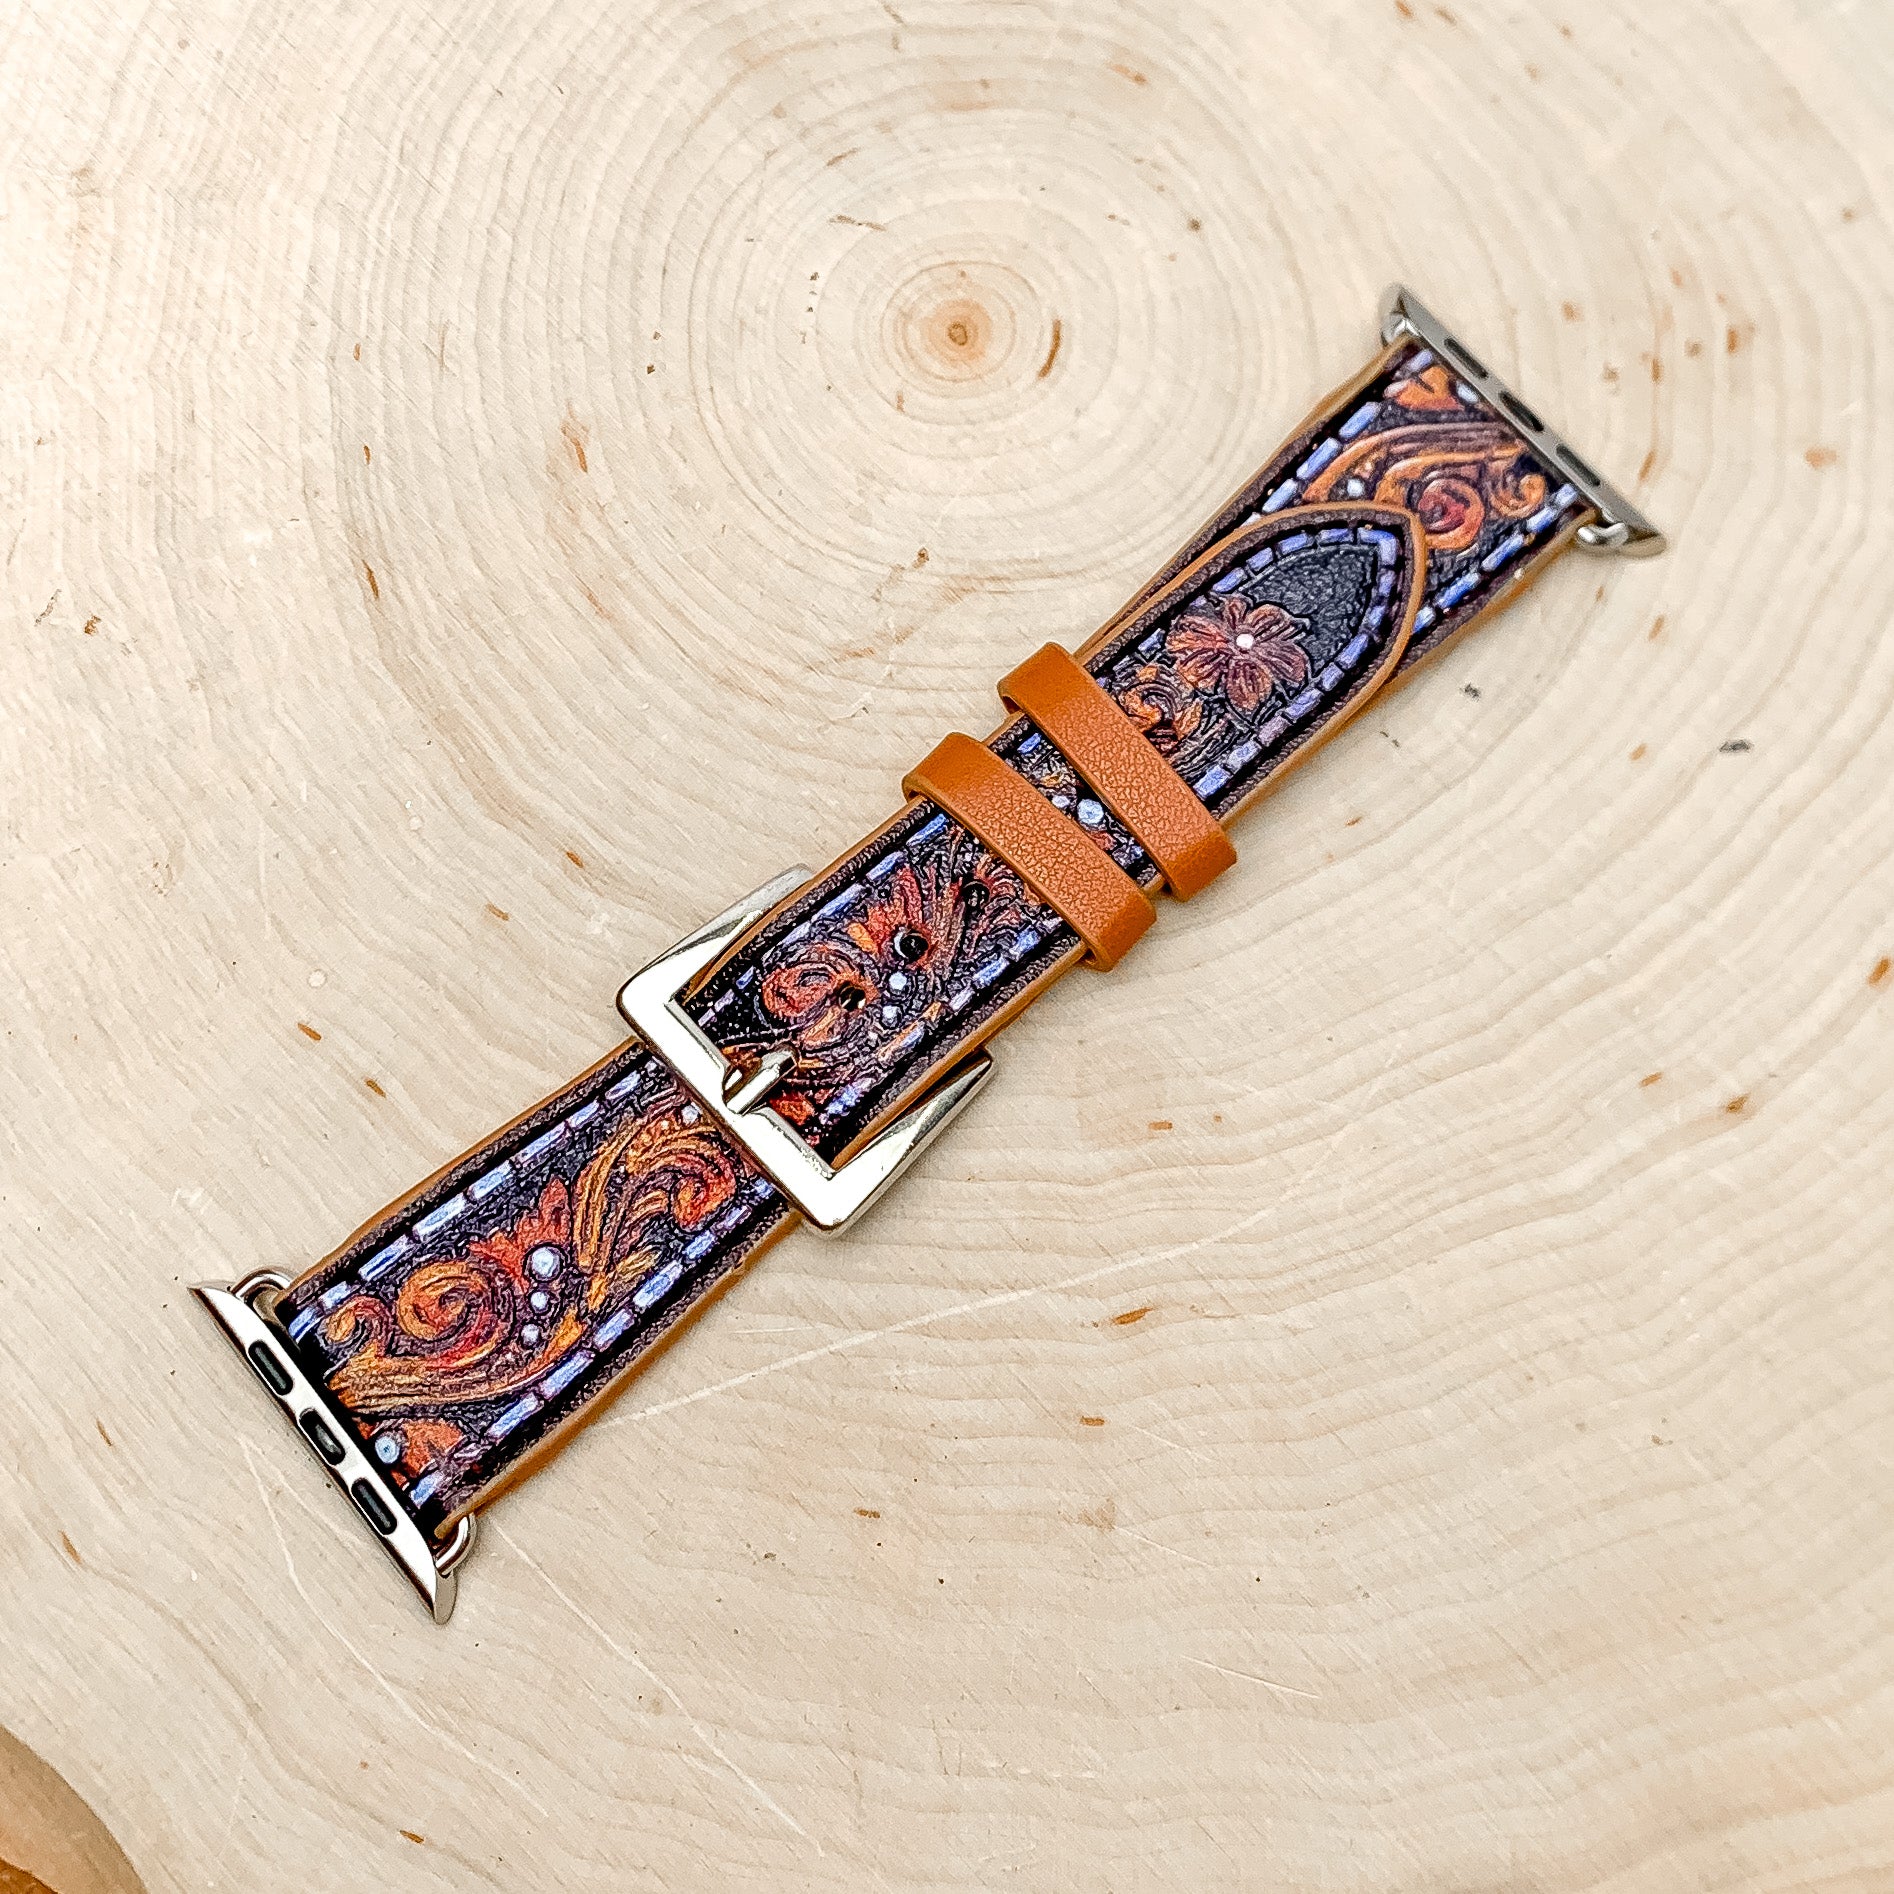 Brown Faux Leather Watch Band With Desert Design. pictured on a wood piece background.